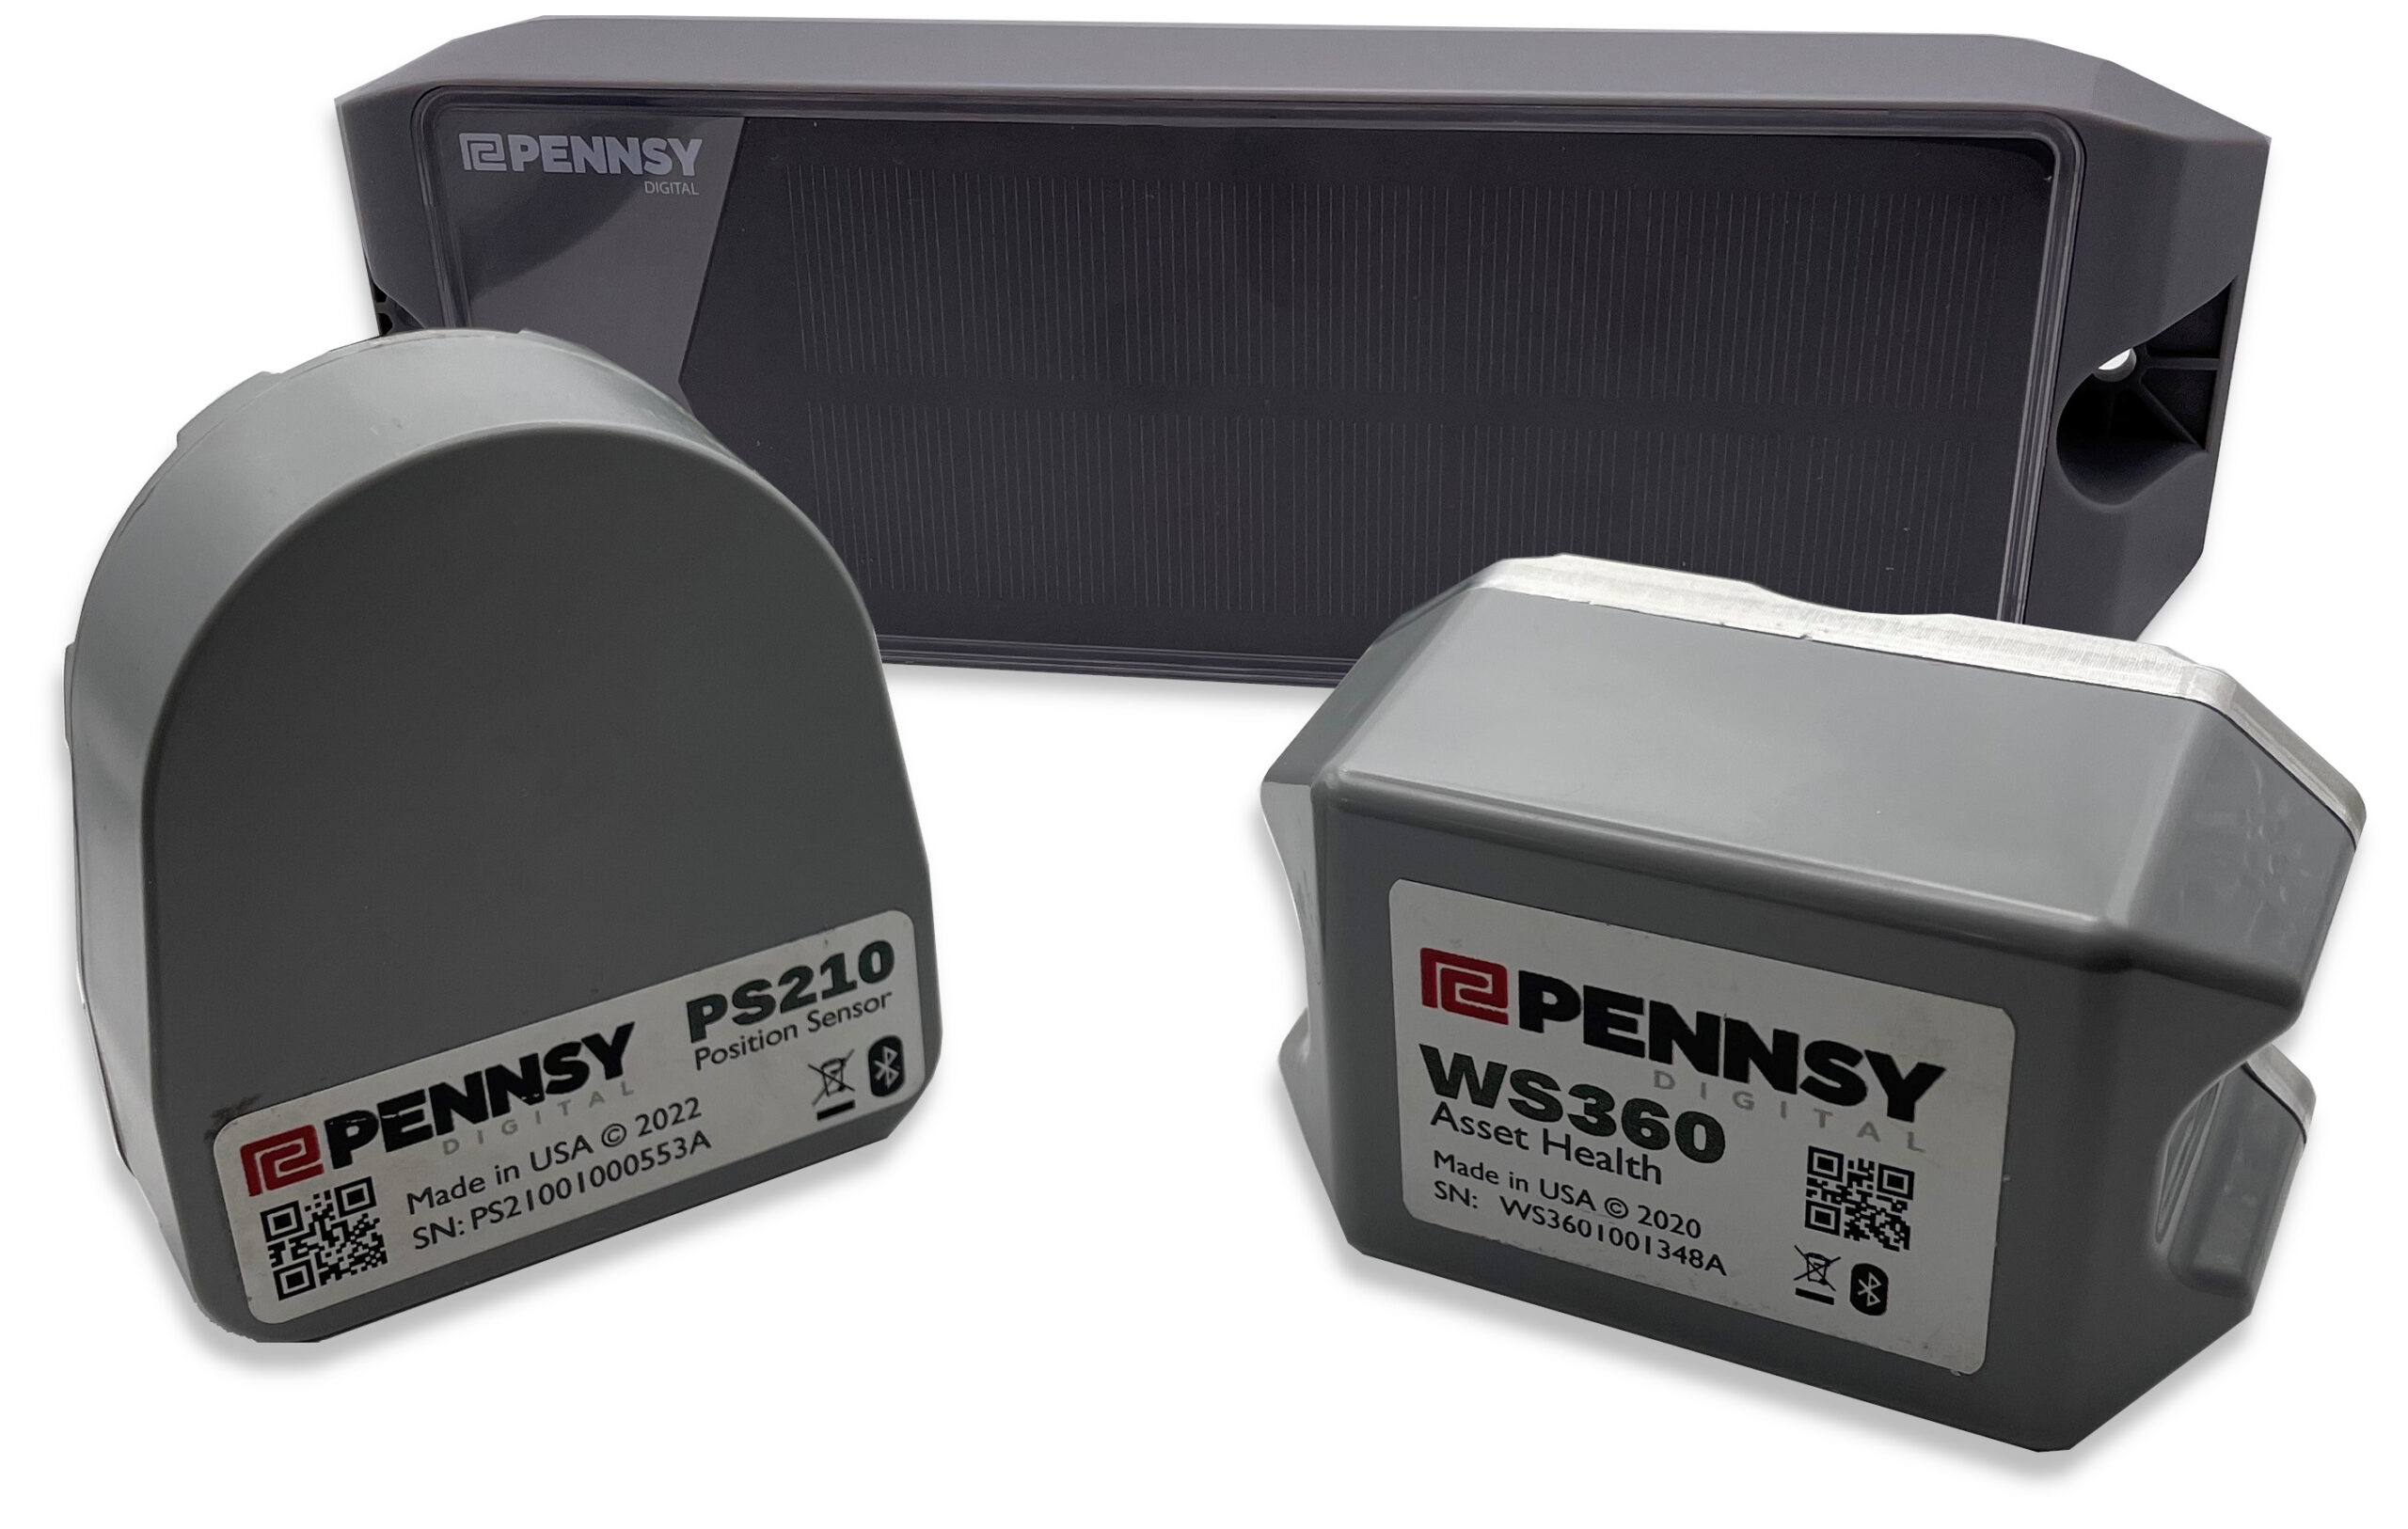 Pennsy Digital's Devices. From left to right: PS210 Position Sensor, MG105 Mobile Gateway, and WS360 Asset Health Sensor